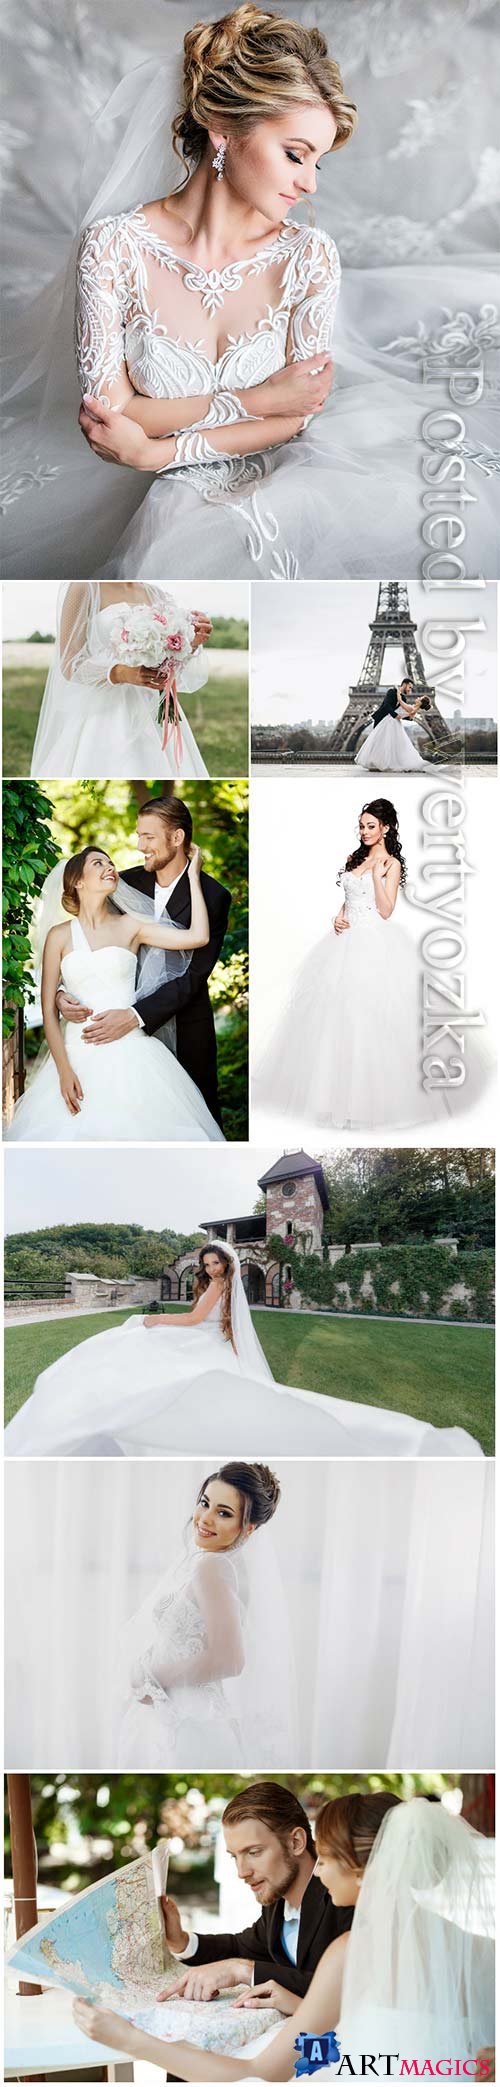 Brides in luxurious dresses and handsome men stock photo